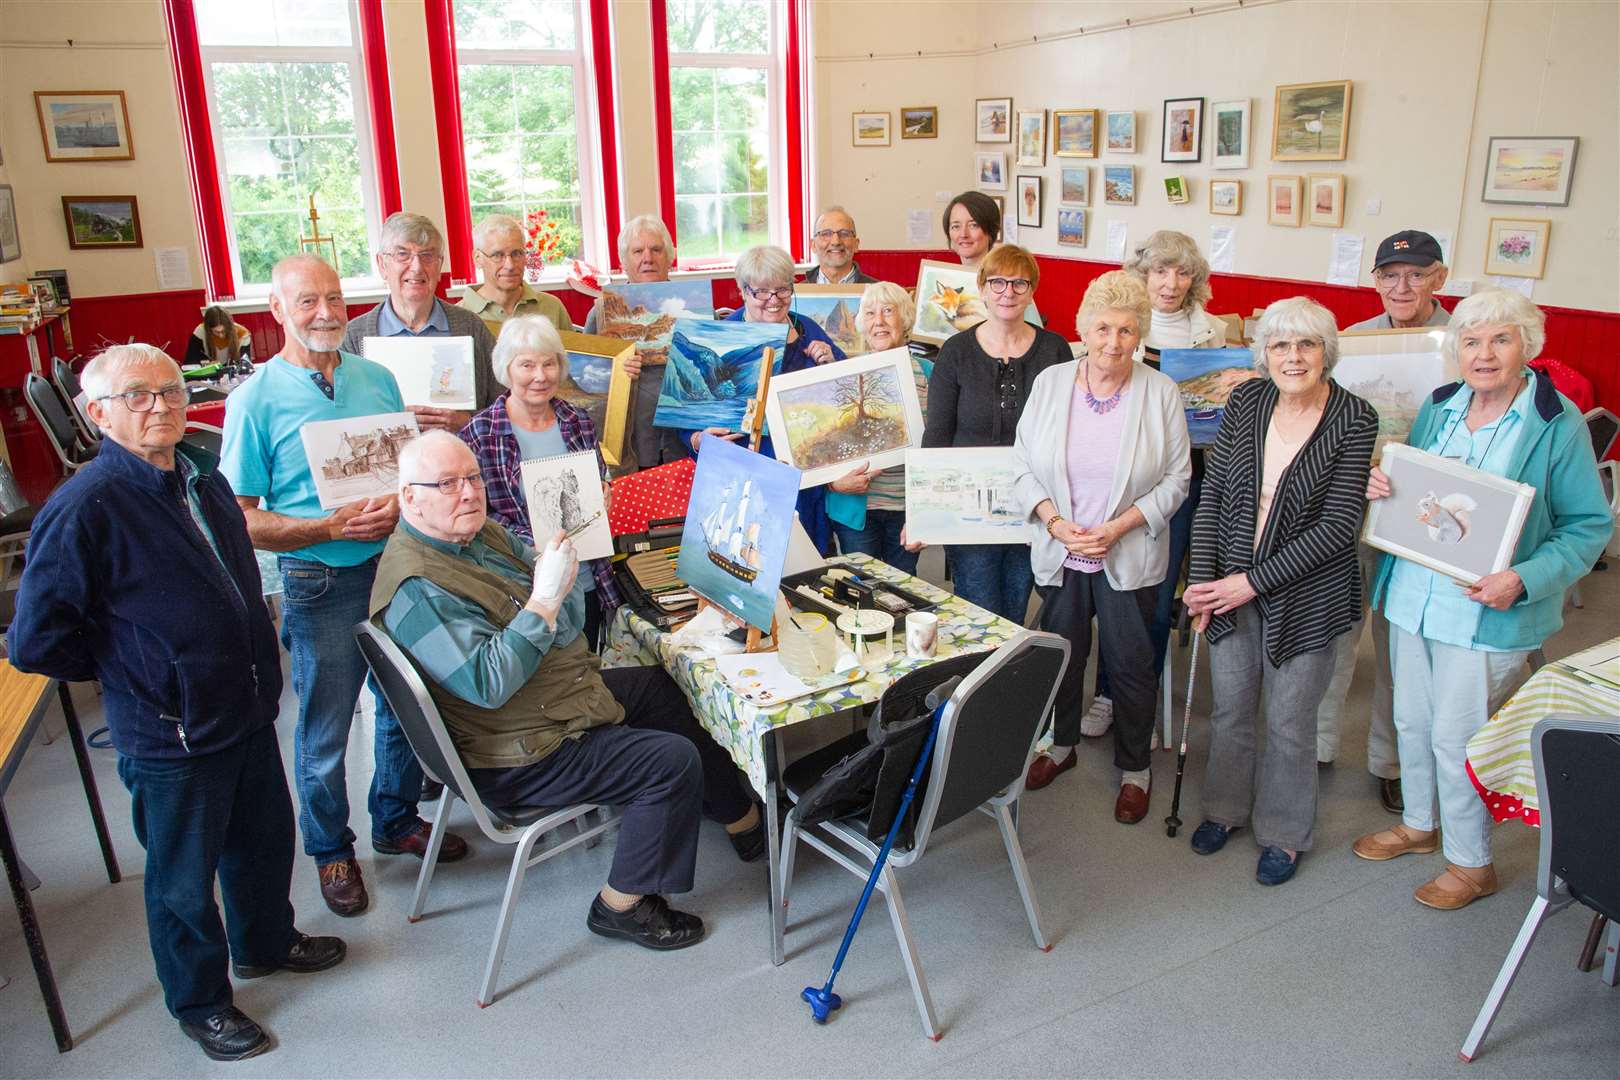 Portgordon Art Group put the finishing touches to their exhibition works. Picture: Daniel Forsyth. Image No.044437